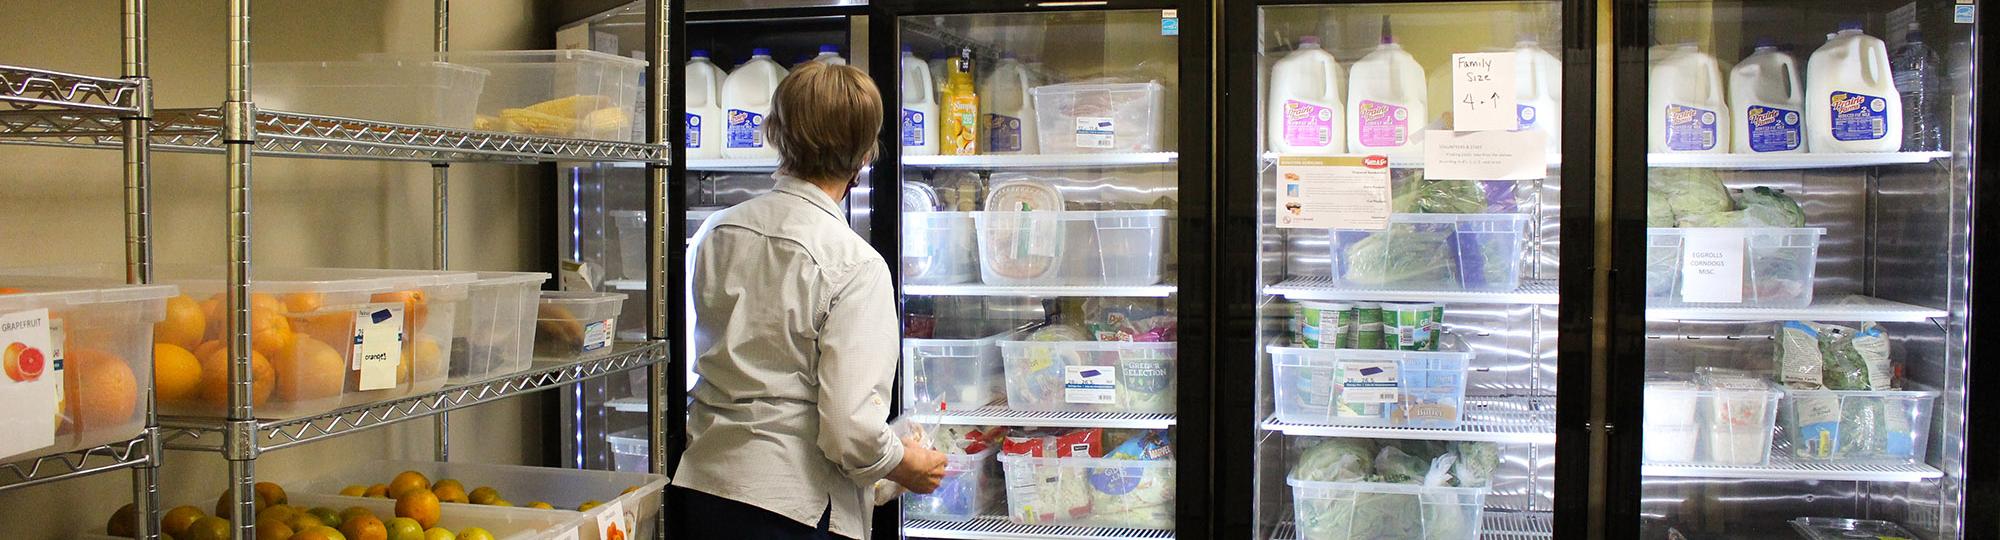 Grant funded refrigerators at The Salvation Army